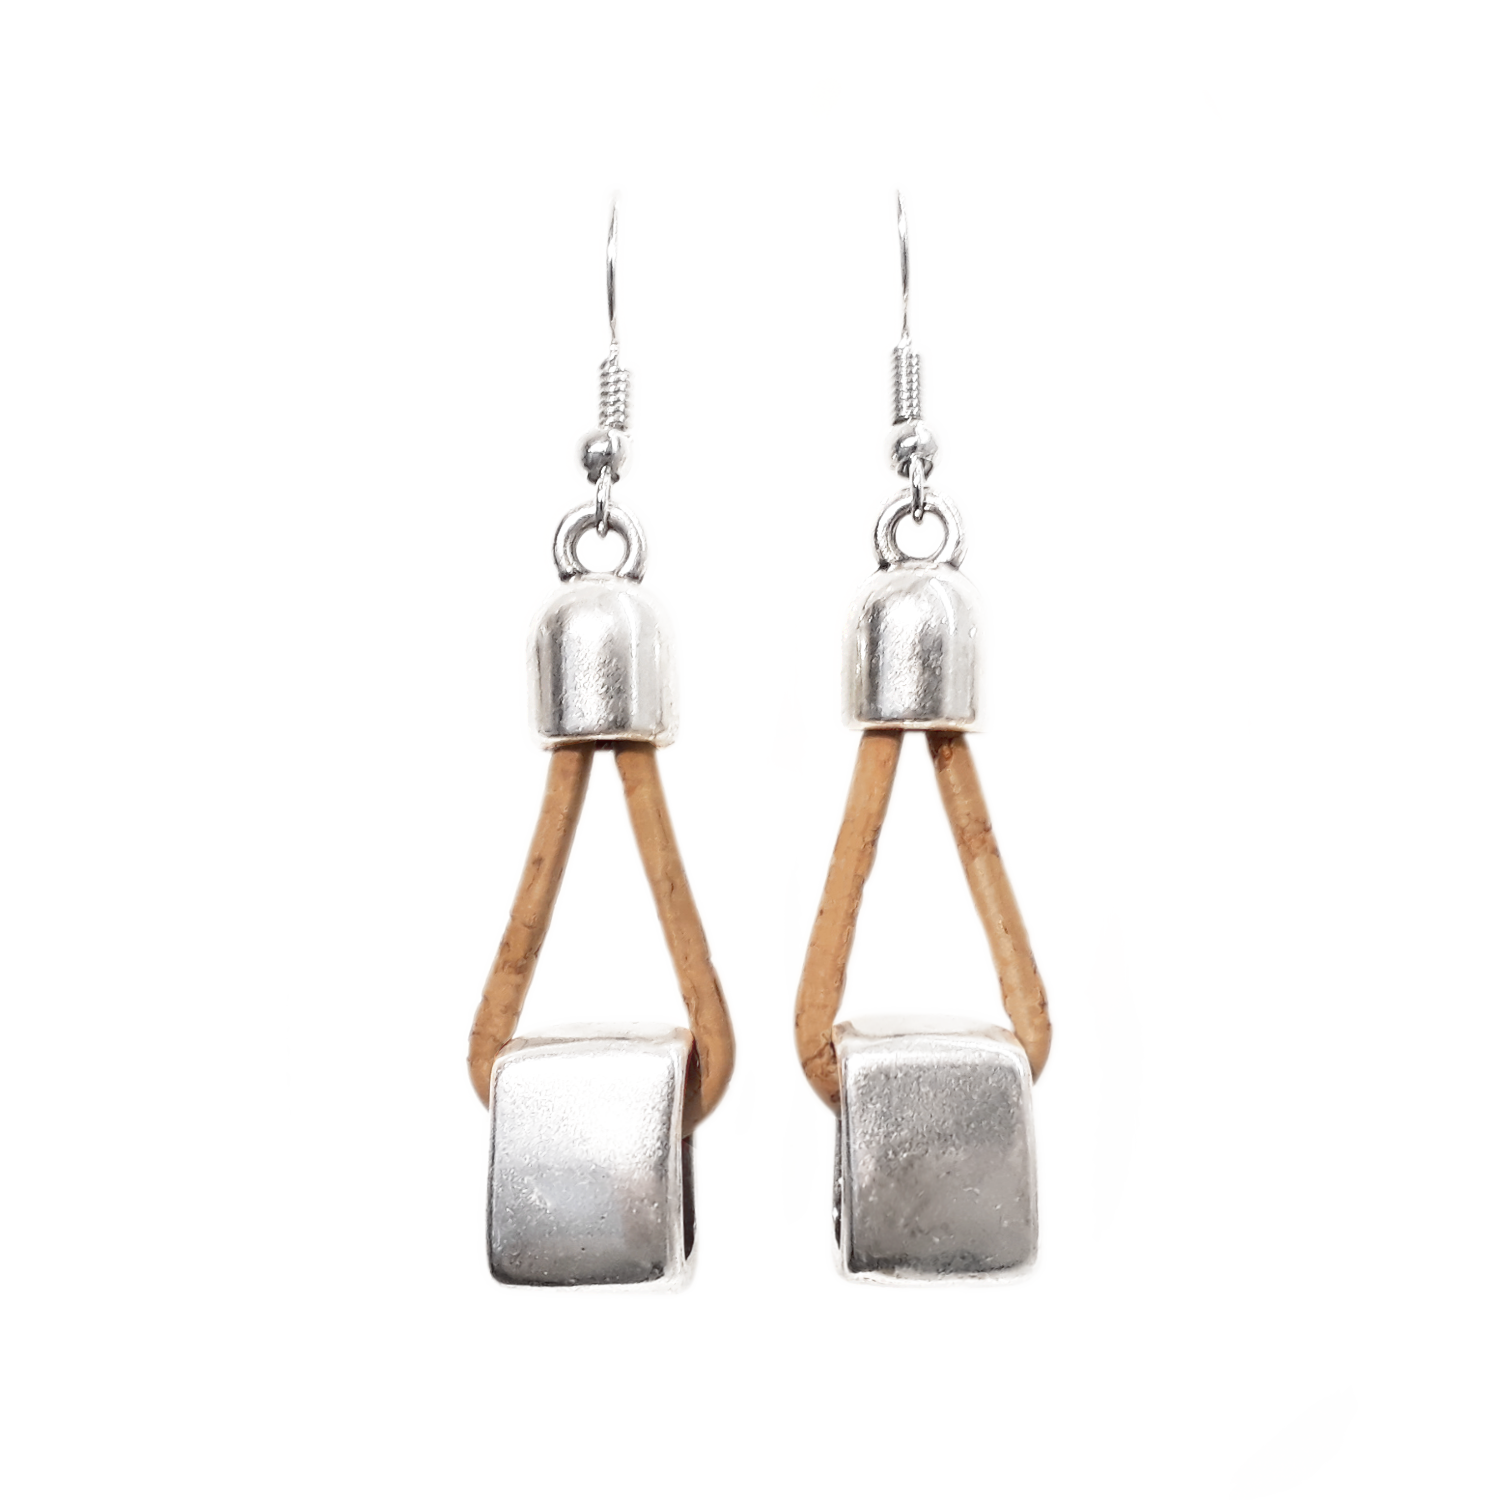 Cork Square (earrings) - Cork and Company | Made in Portugal | Vegan Eco-Friendly Fashion